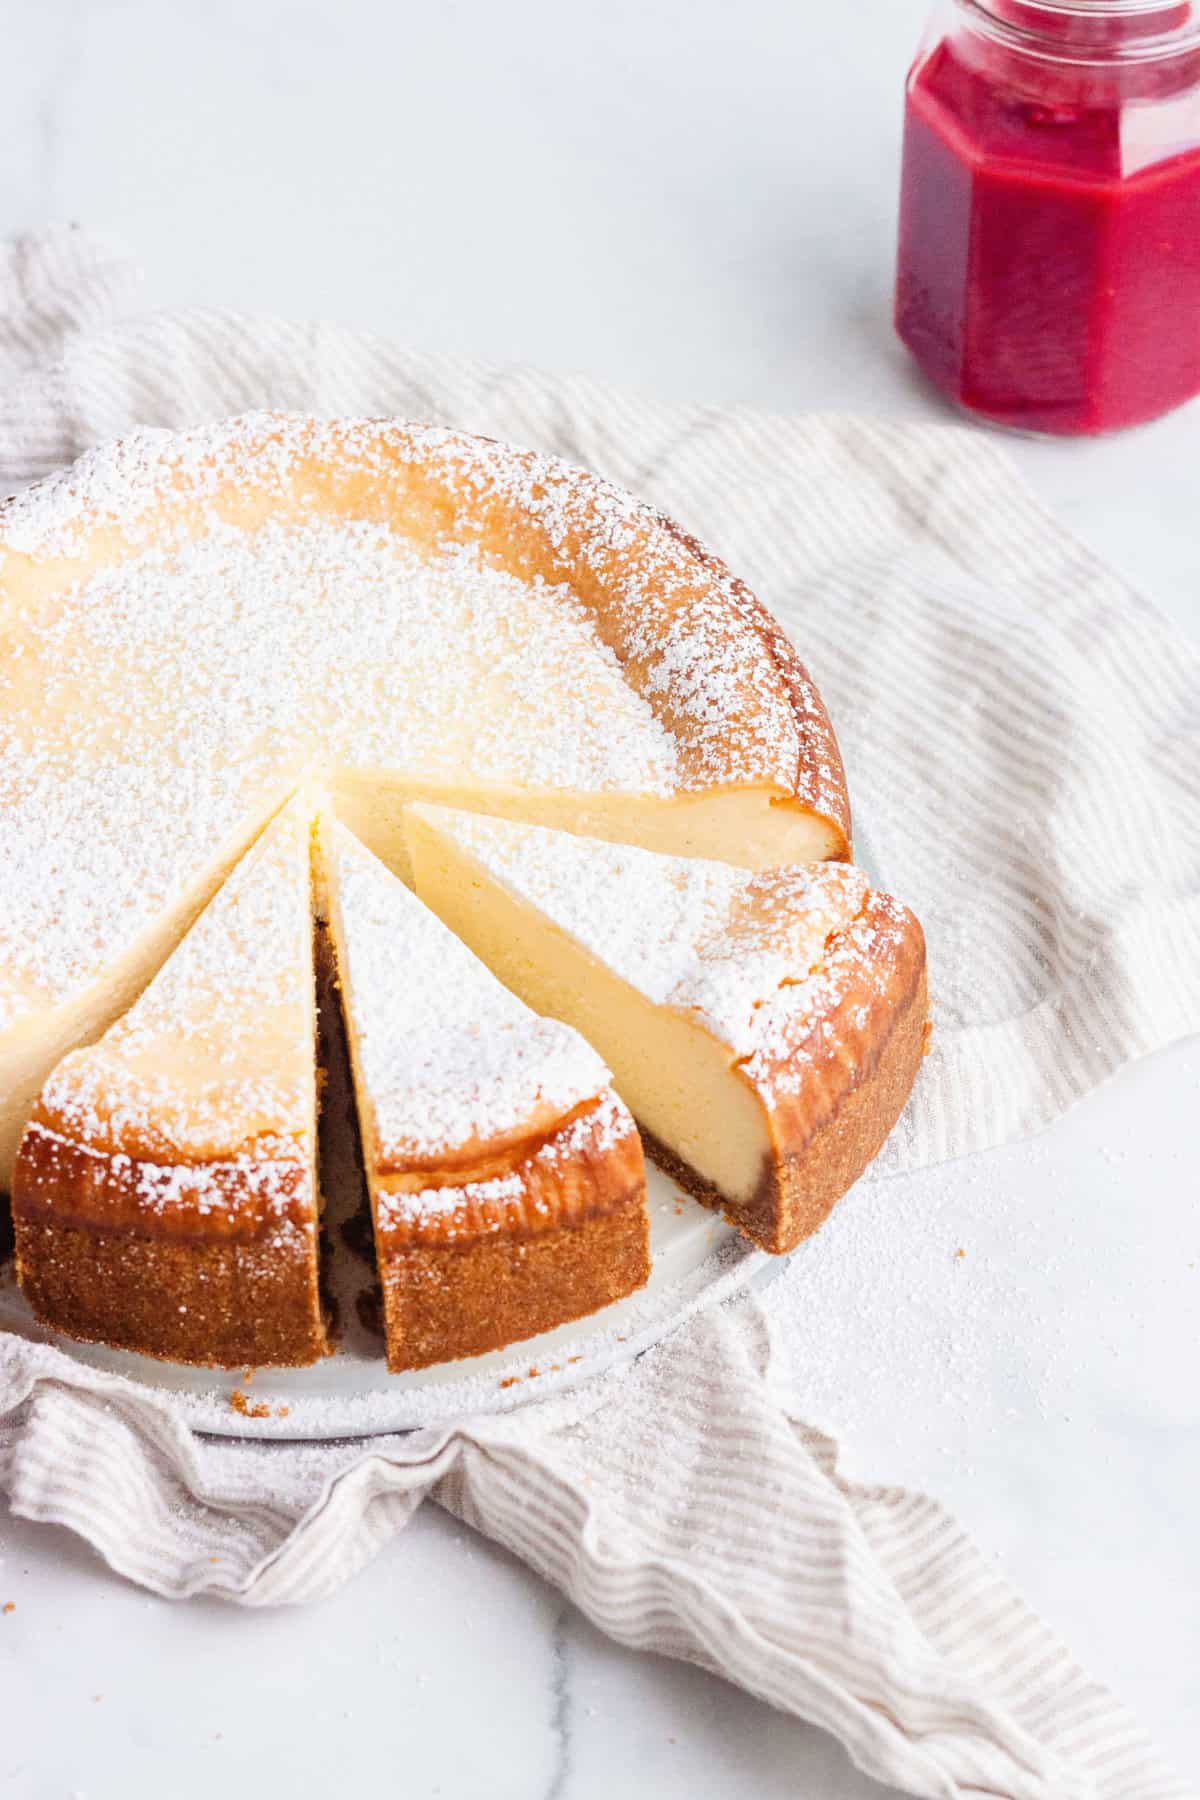 Baking School In-Depth: New York-Style Cheesecake - Bake from Scratch